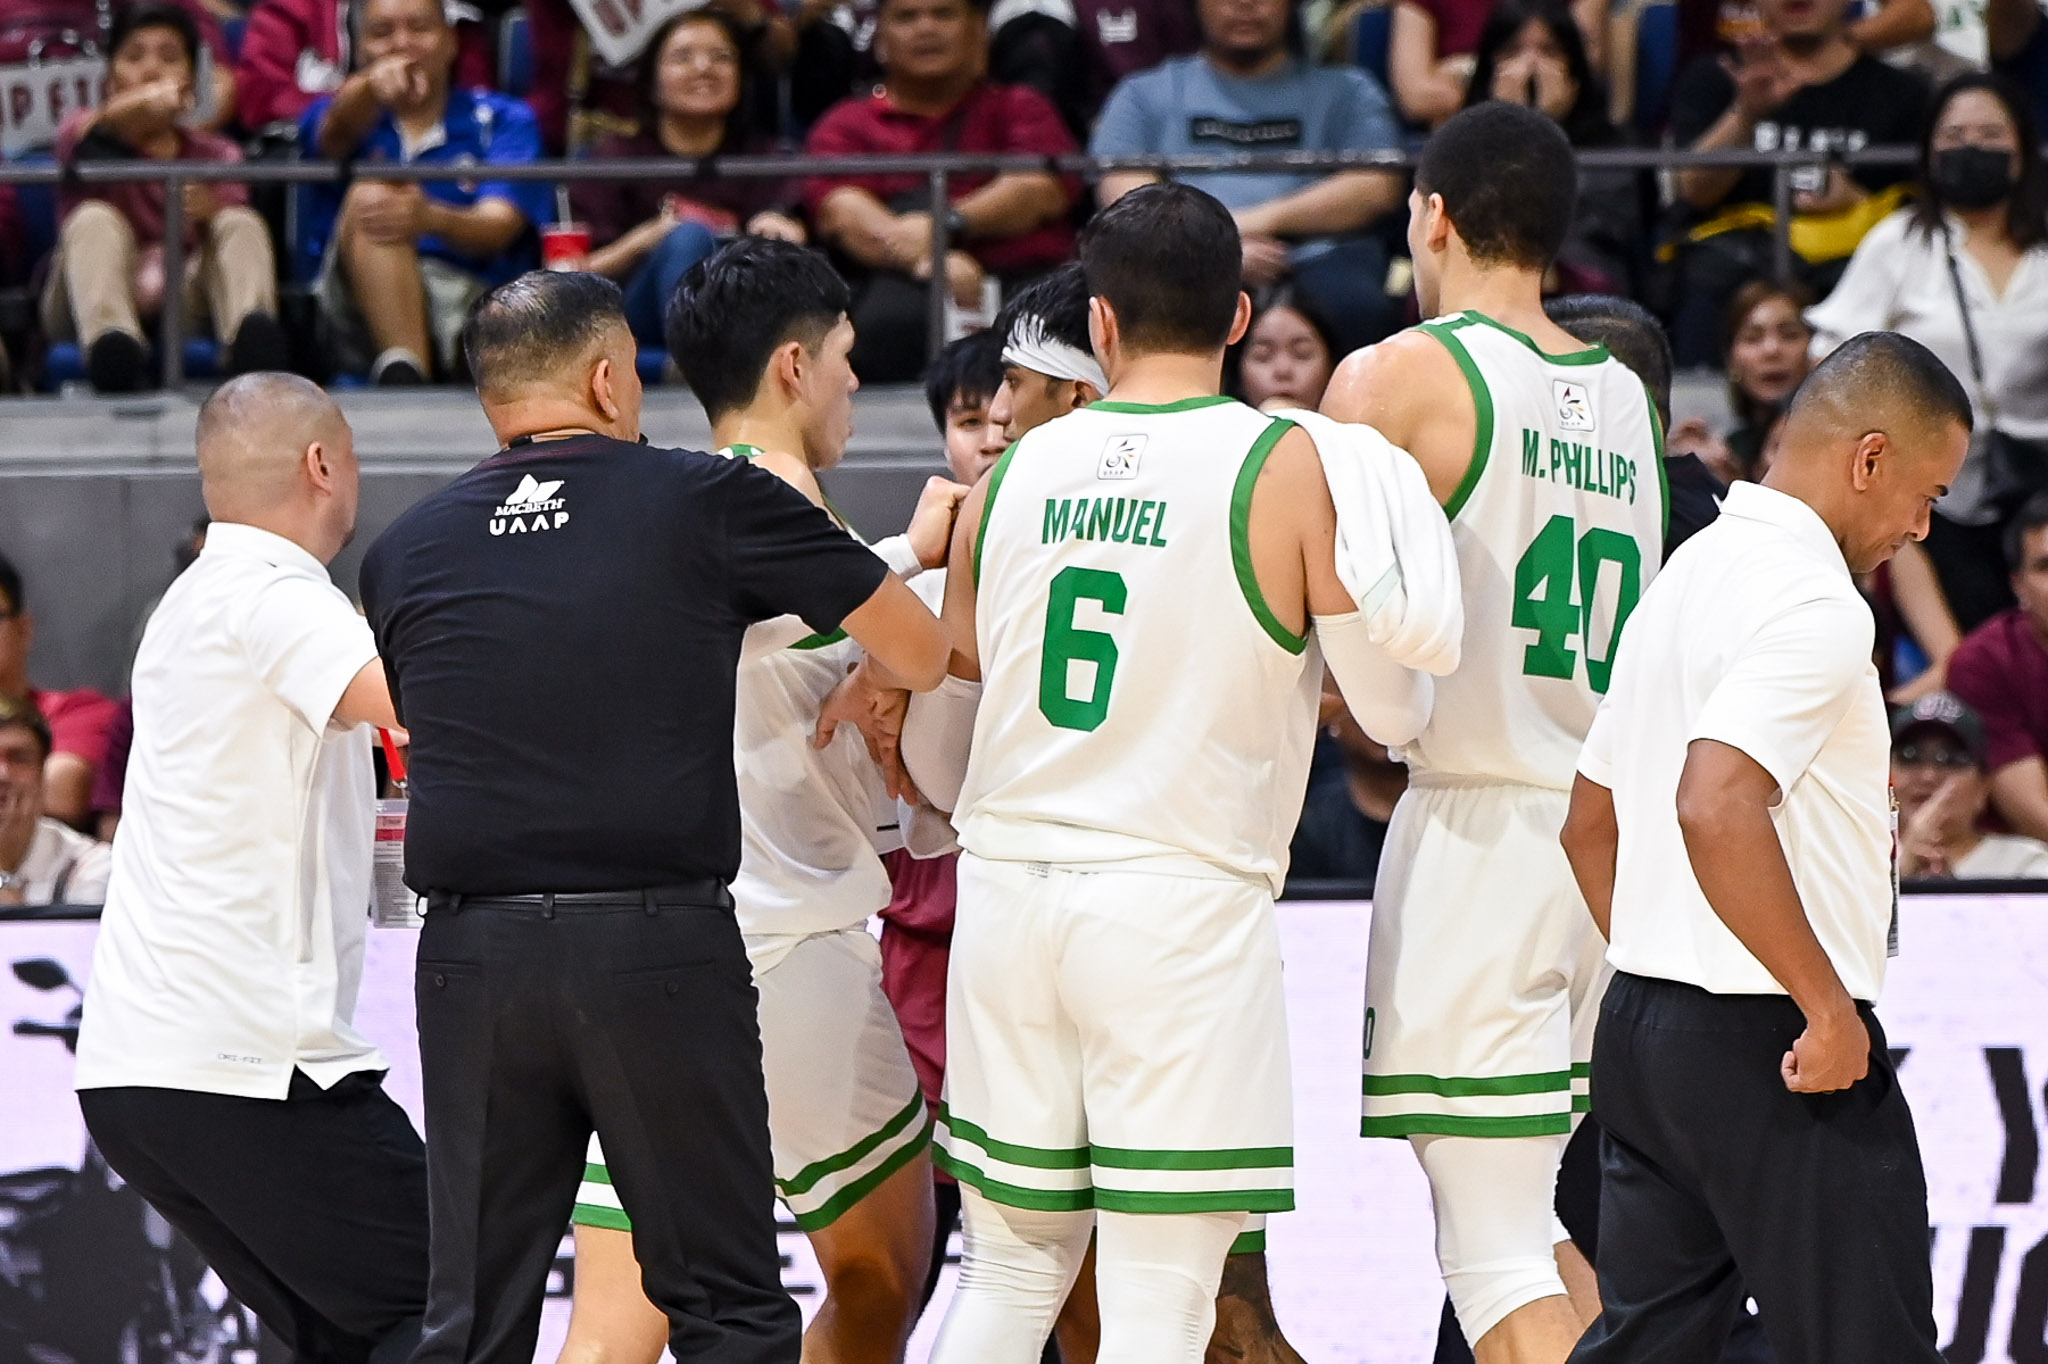 UAAP86-MBB-JOAQUI-MANUEL-0836 Joaqui Manuel proves in Game 2 that he always has his brothers' backs Basketball DLSU News UAAP  - philippine sports news